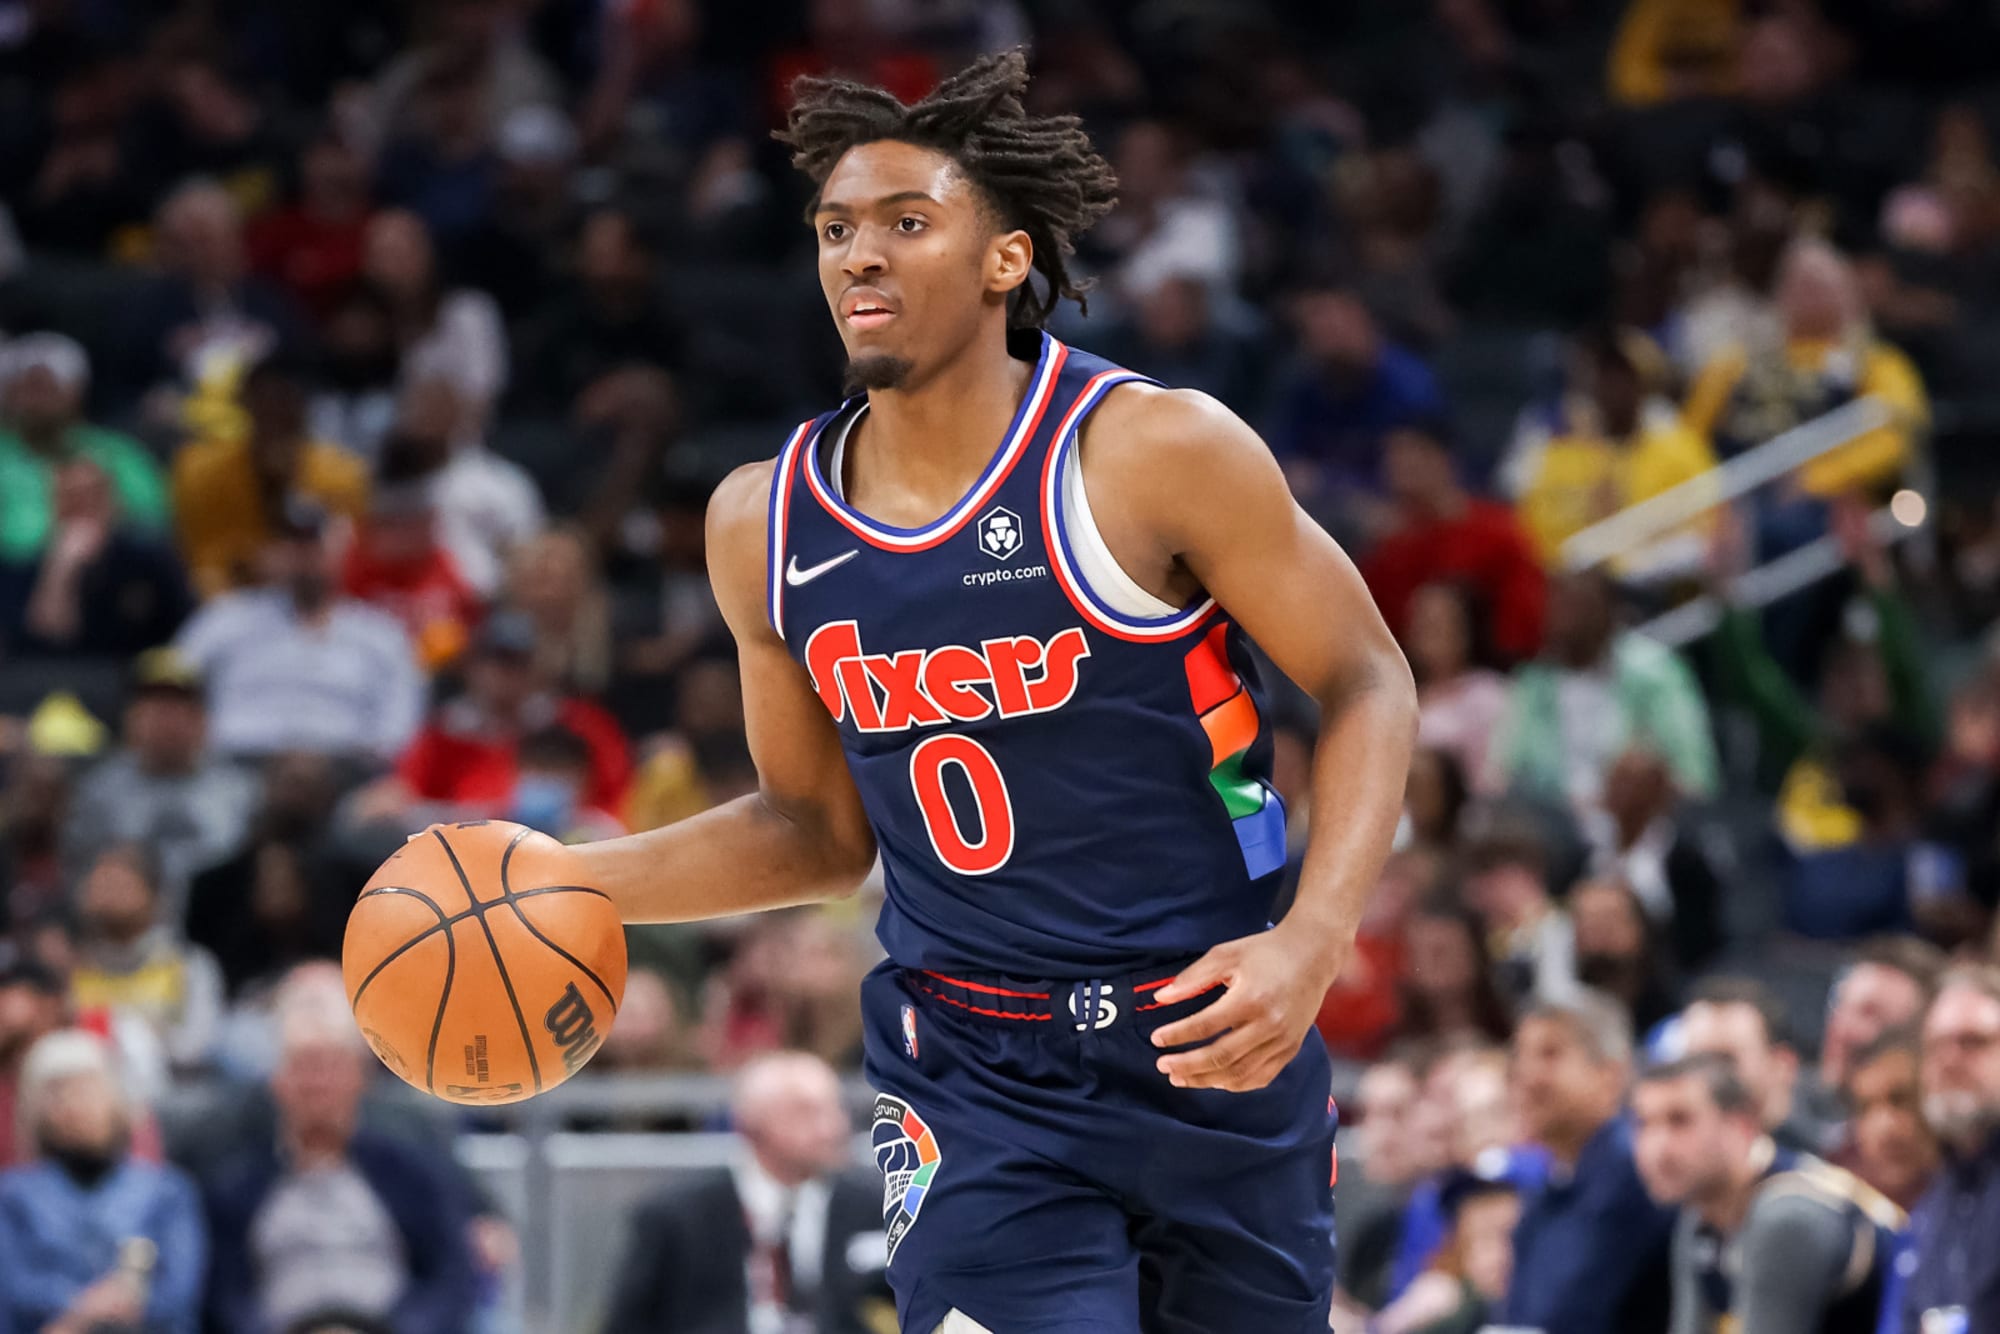 Tyrese Maxey keys fast start as 76ers pound Bulls 116-91